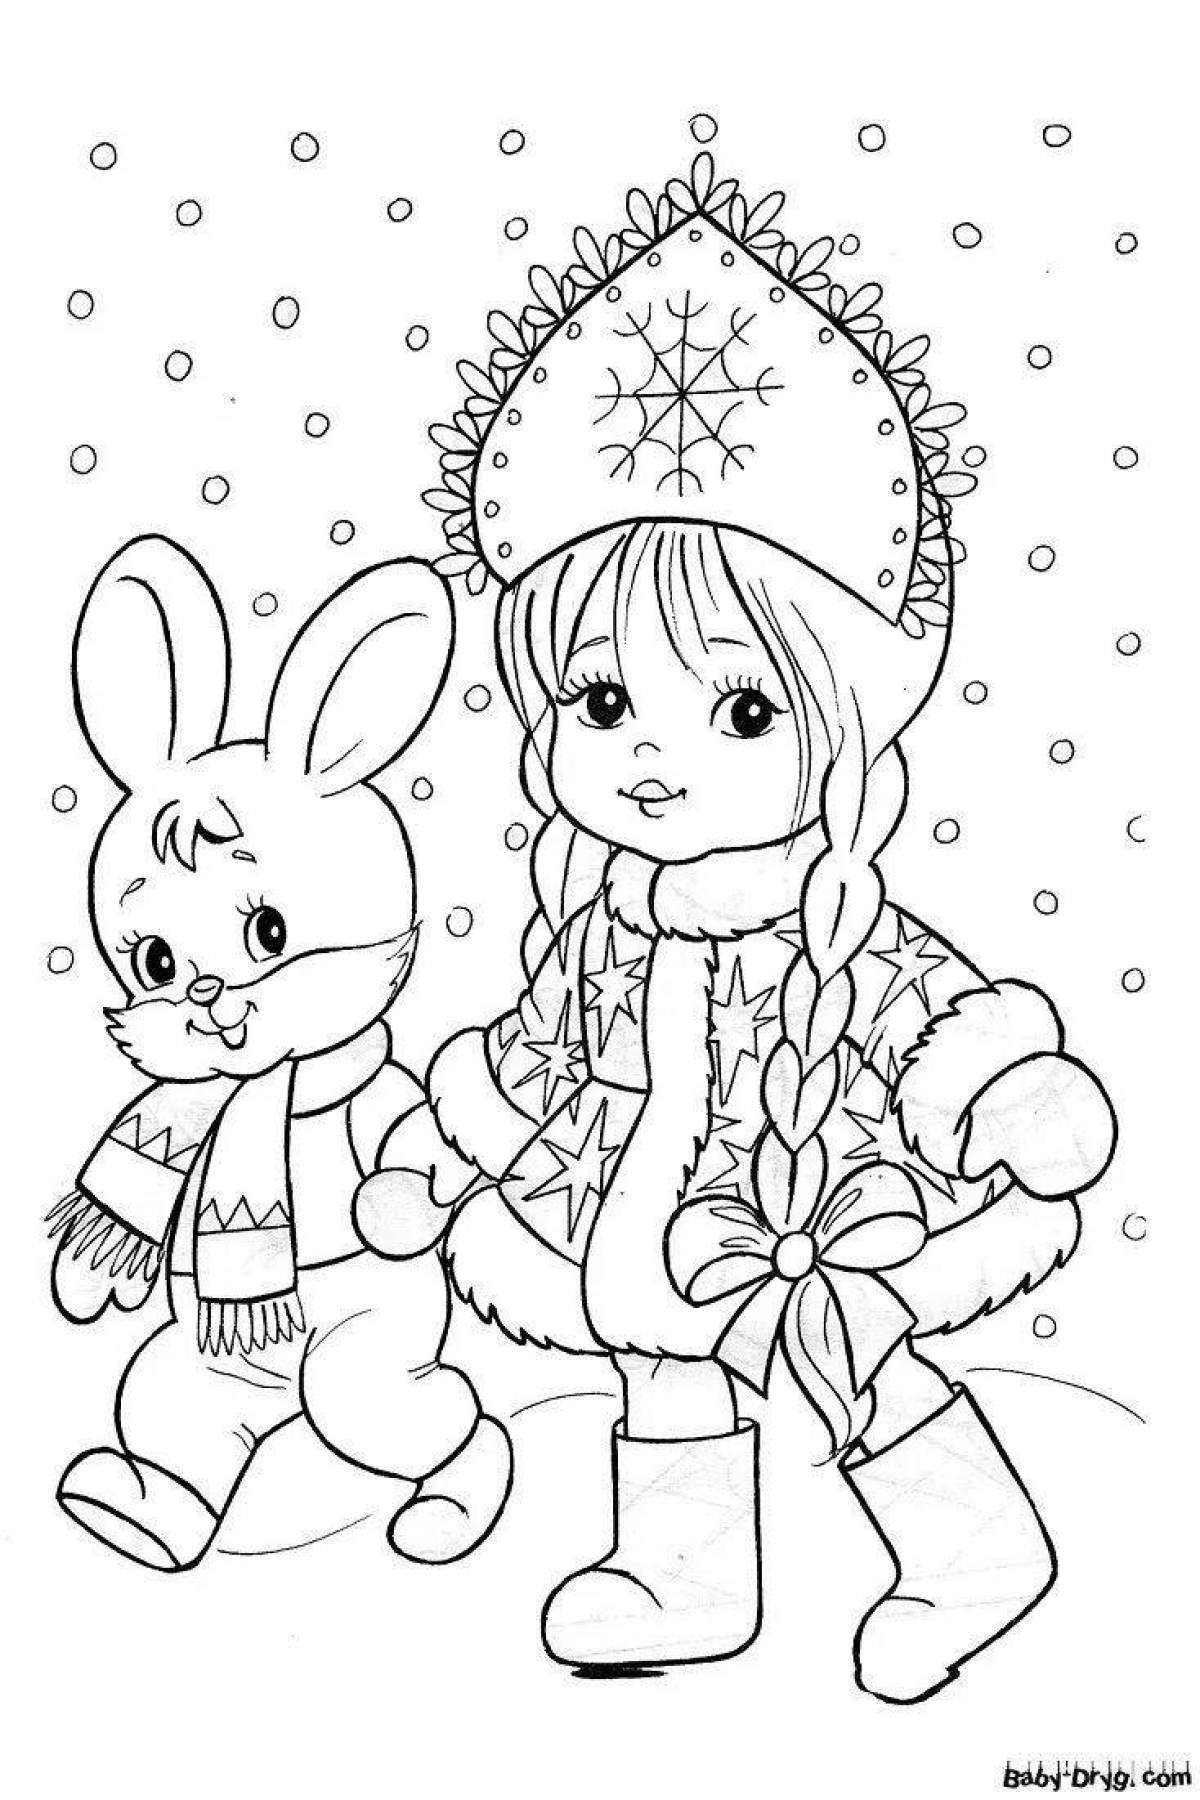 Sparkling Christmas coloring book for girls